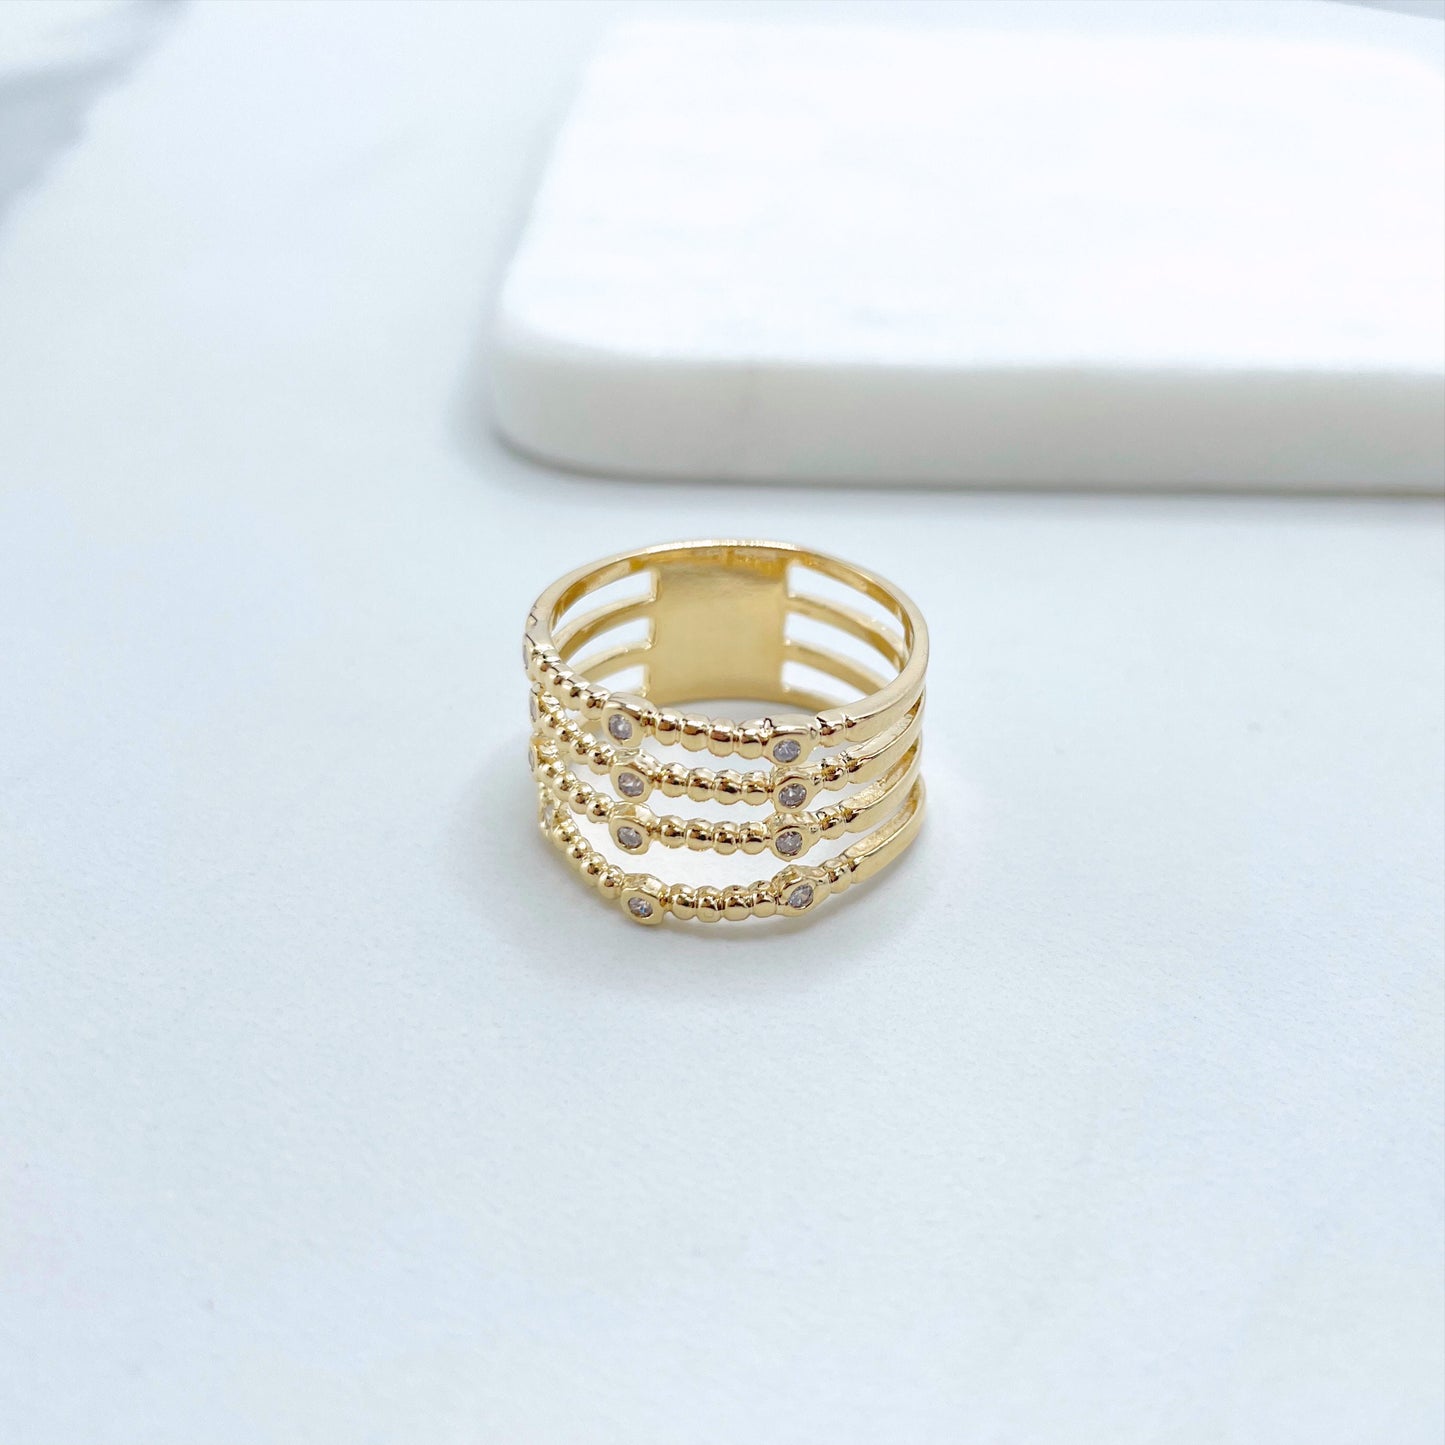 18k Gold Filled Simulated Stacking Ring Featuring with Micro Cubic Zirconia, Wholesale Jewelry Making Supplies